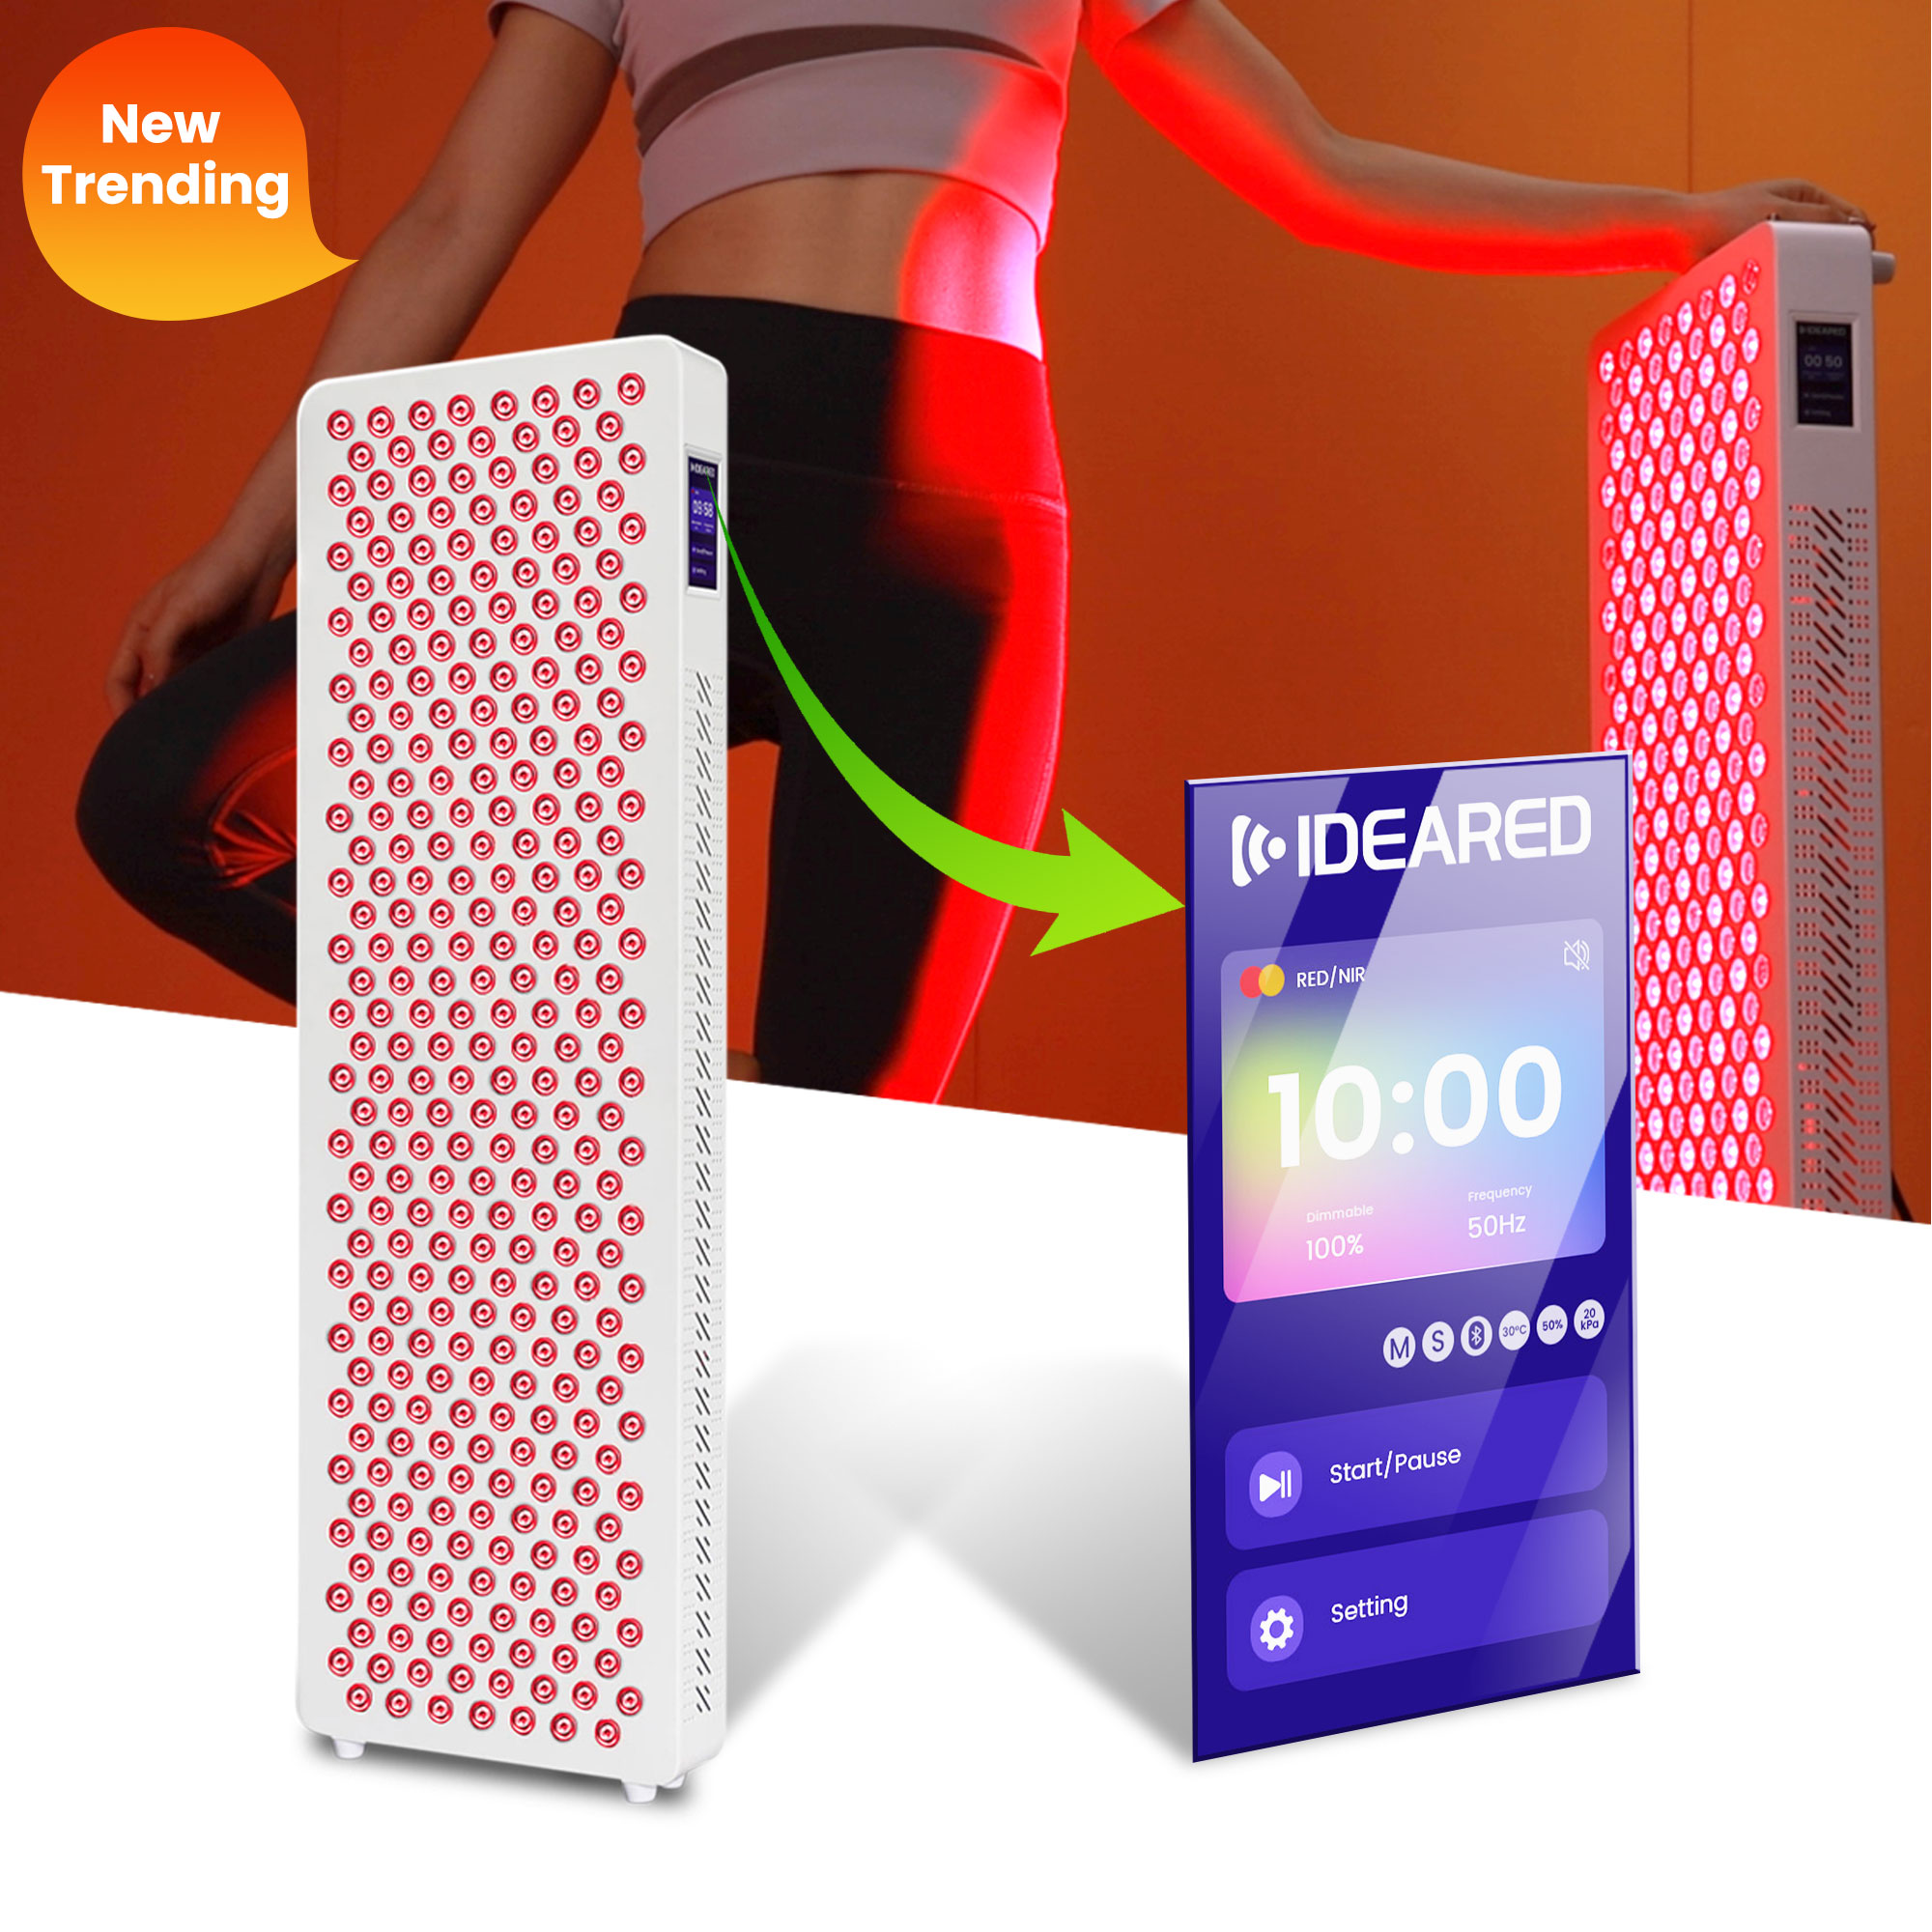 RL300MAXPT Touch Screen Pulse Mode 300pcs LED Multifunctional Bracket Full Body Infrared Lamp Device Red Light Therapy Panel